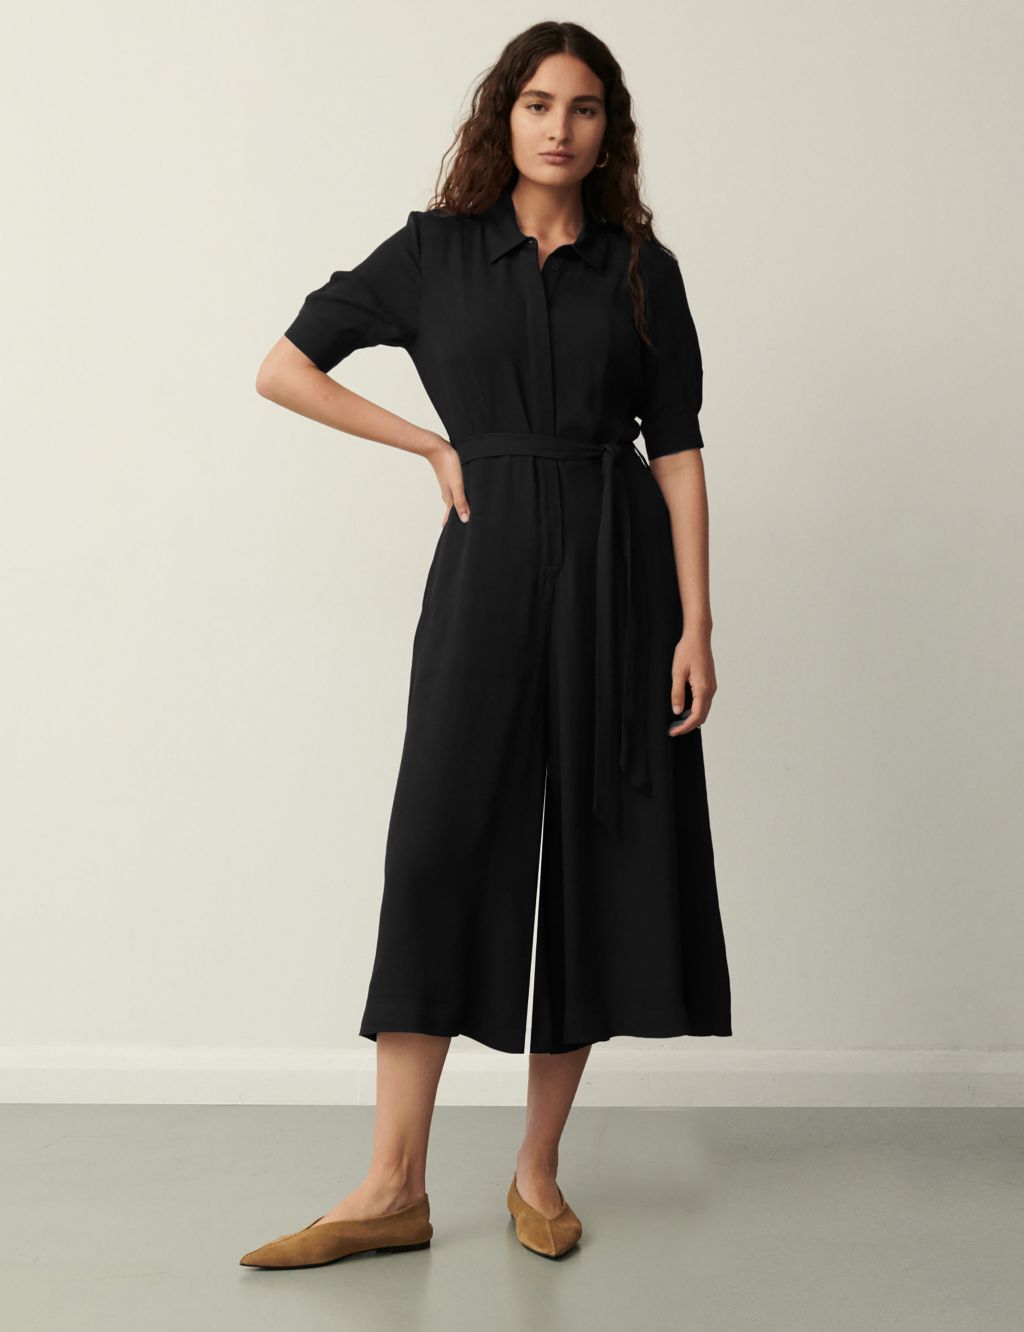 Buy Women's Jumpsuits from the M&S UK Online Shop